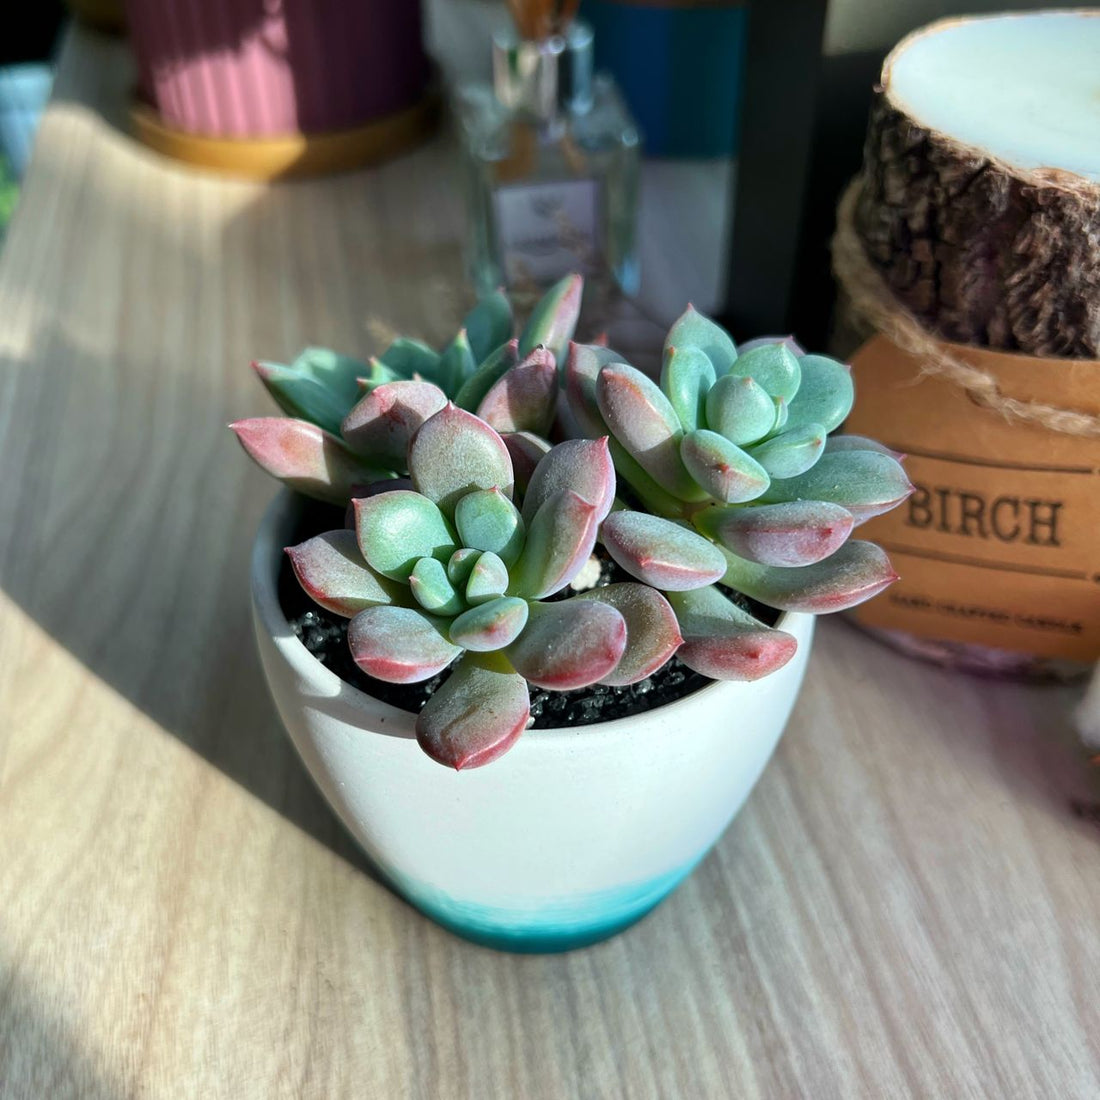 What soil should I use for succulents?